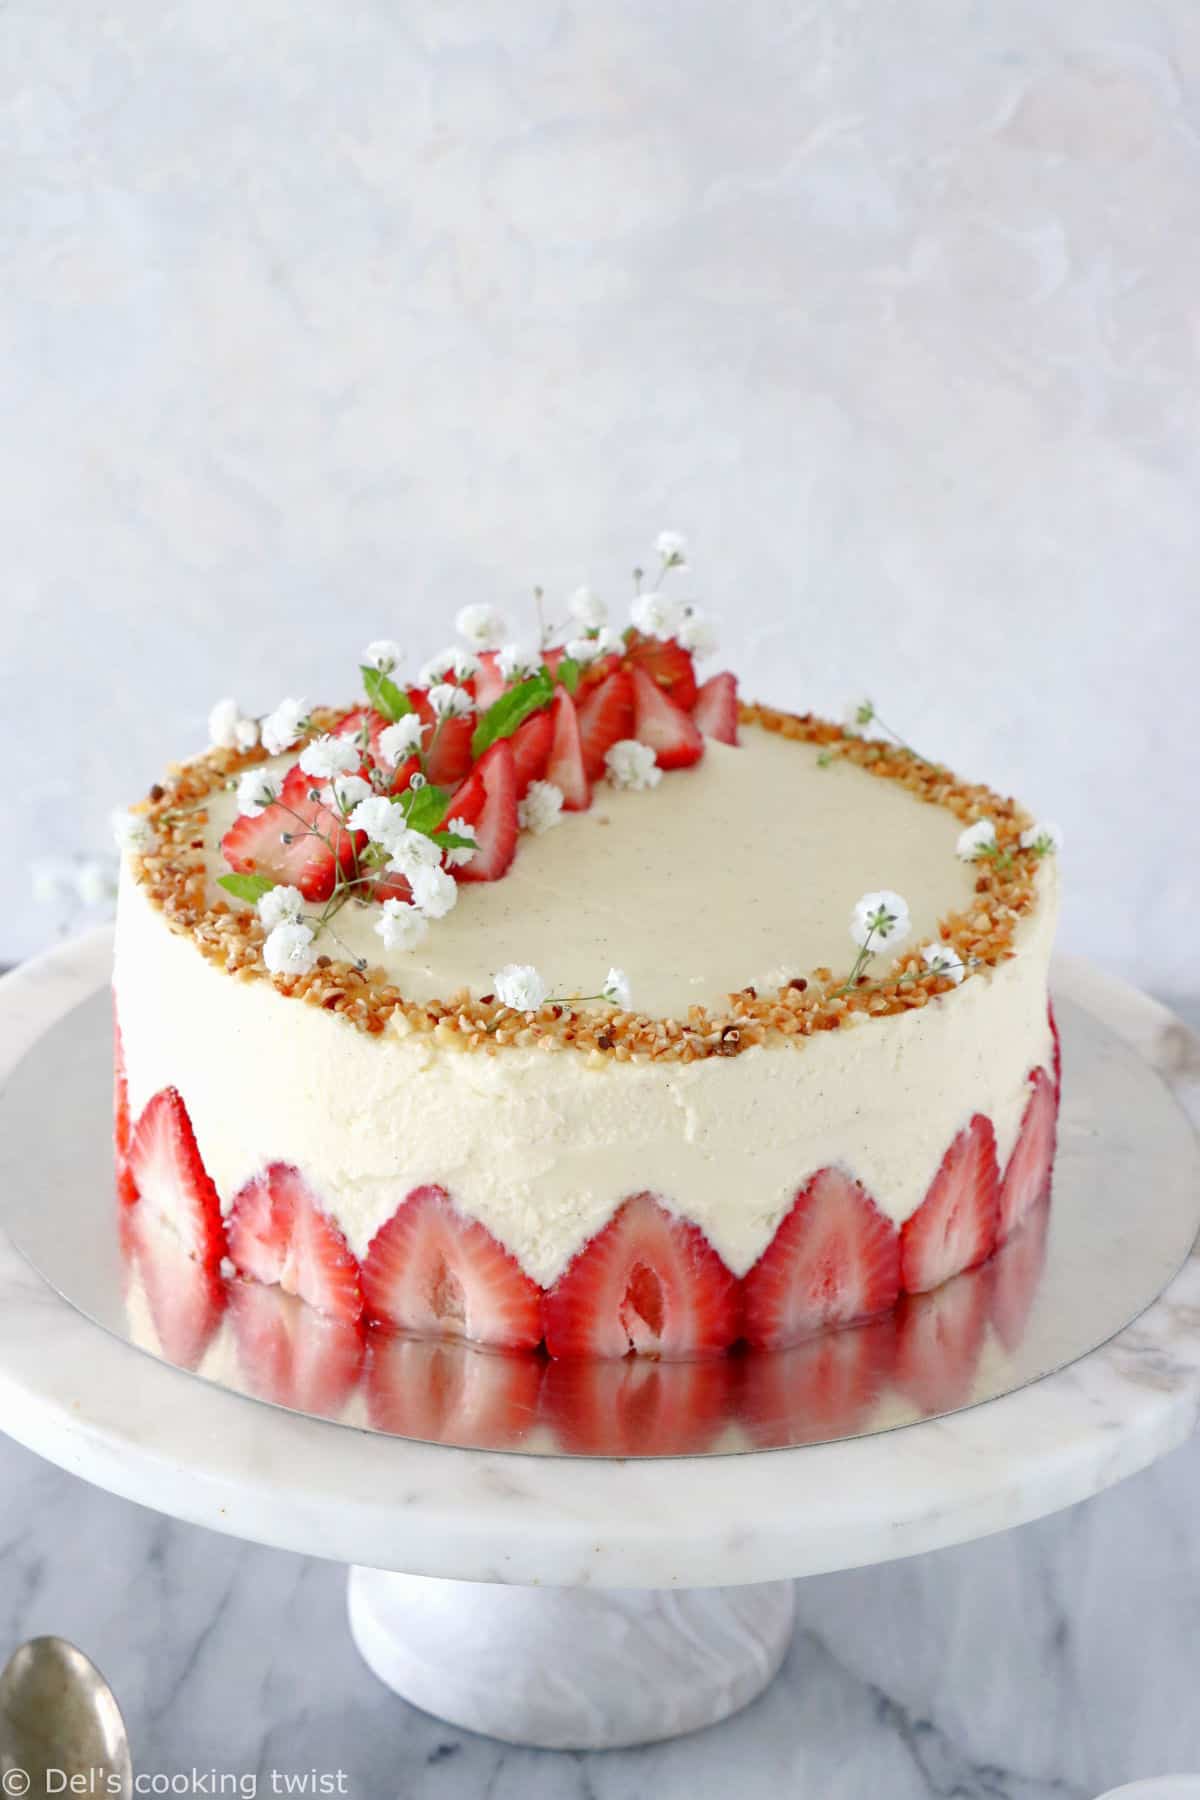 Fraisier cake is a traditional French strawberry cake, consisting of two layers of genoise sponge, filled with a silky delicious vanilla mousseline cream and fresh strawberries.